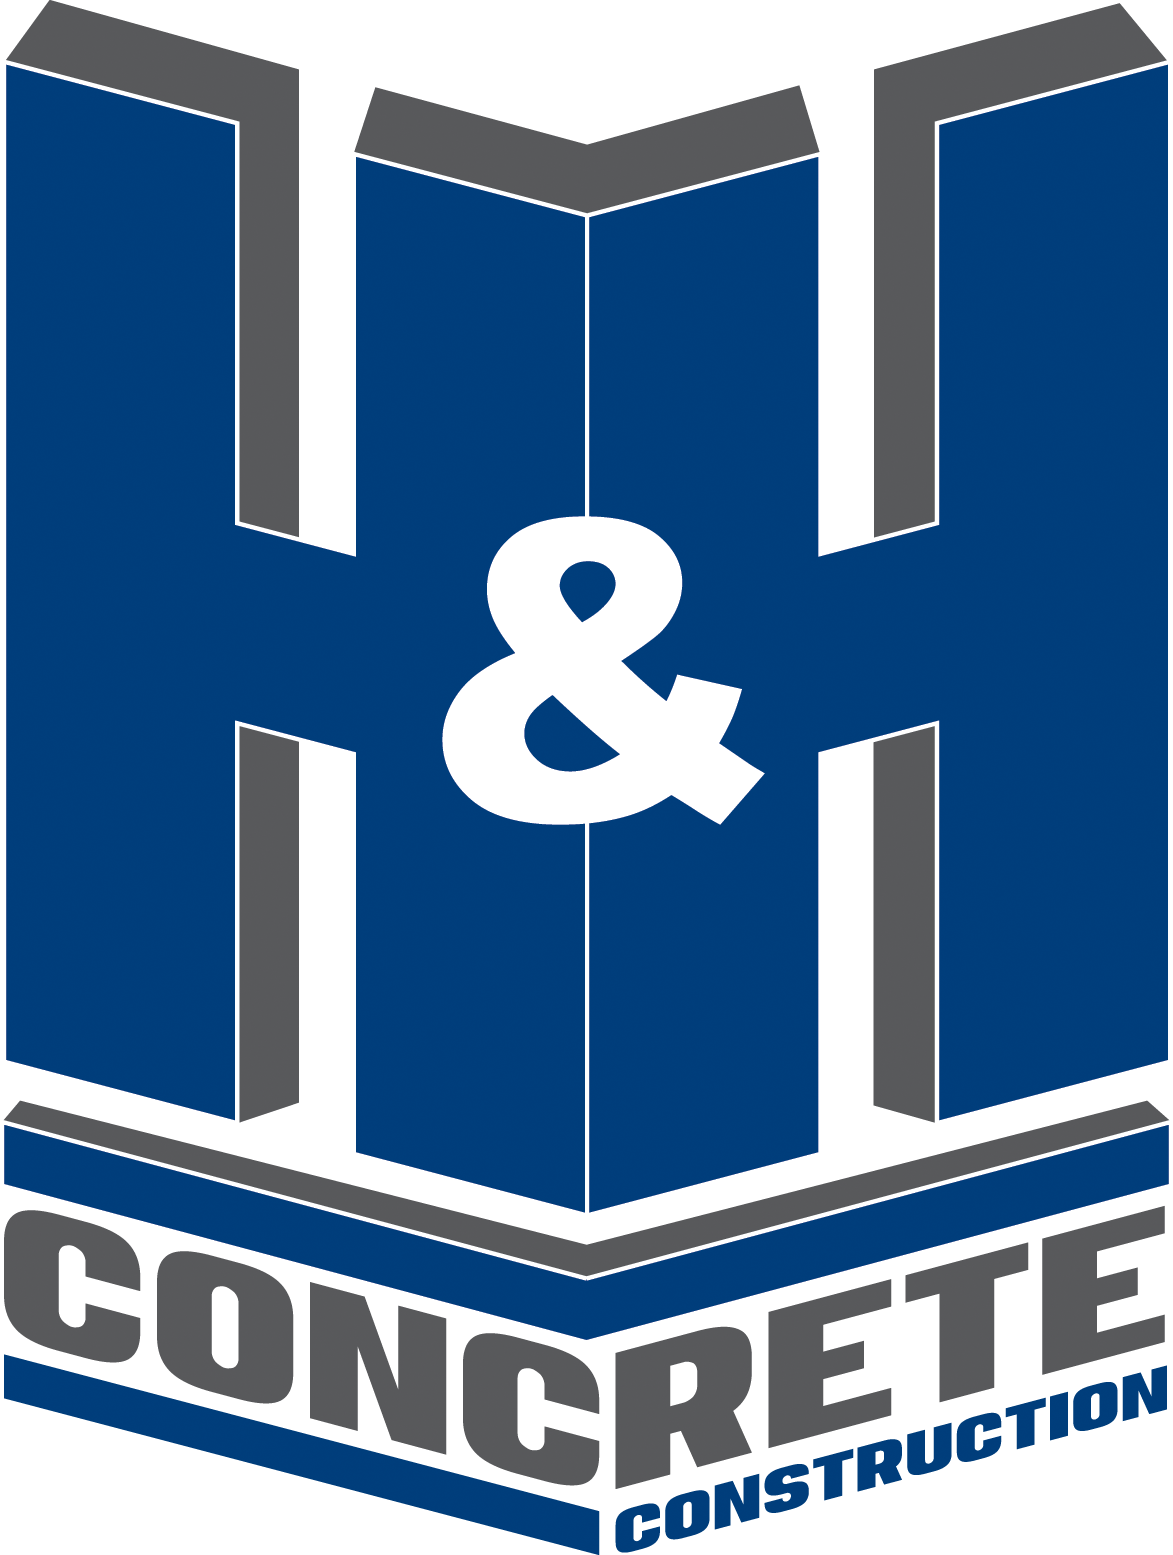 The logo for h & h concrete construction is blue and gray.